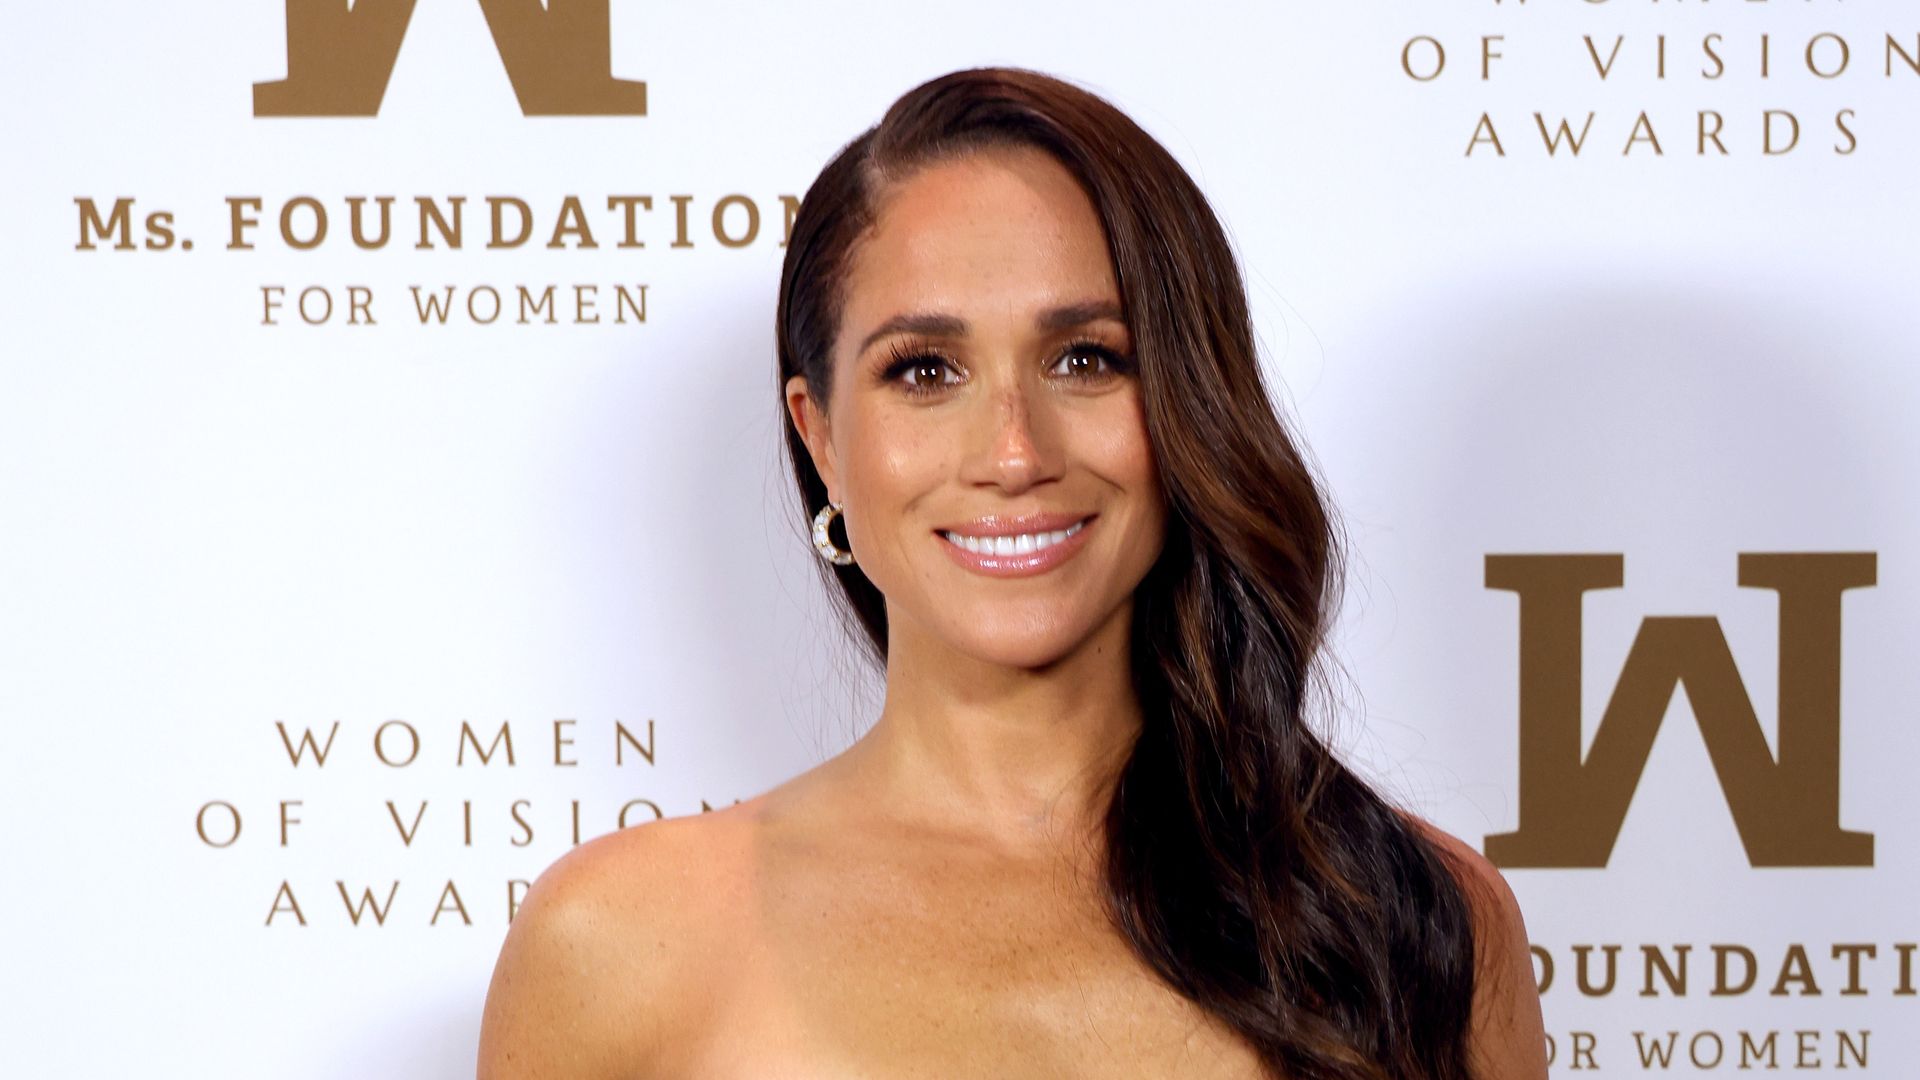 Meghan Markle smiling, wearing a gold dress at the Women of Vision Awards